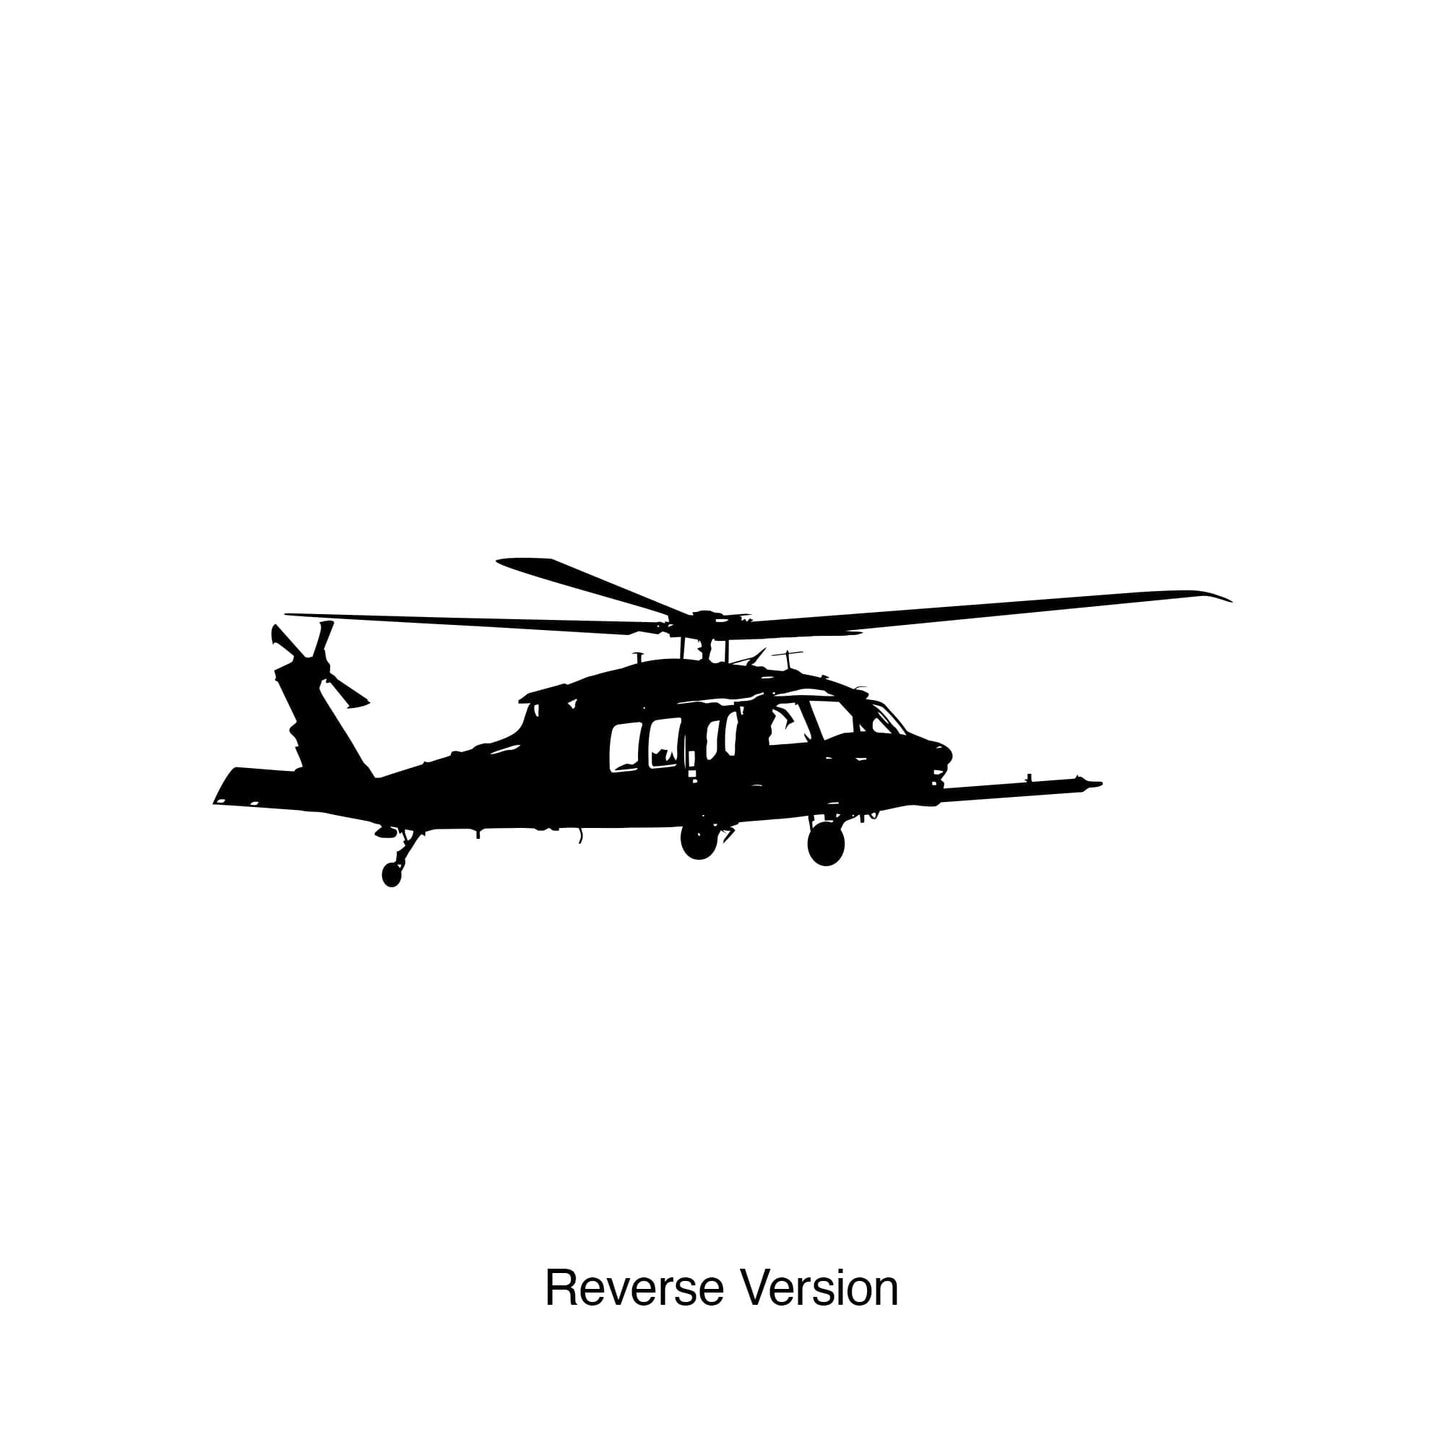 MH-60 Black Hawk Helicopter Vinyl Wall Decal Sticker. #5470